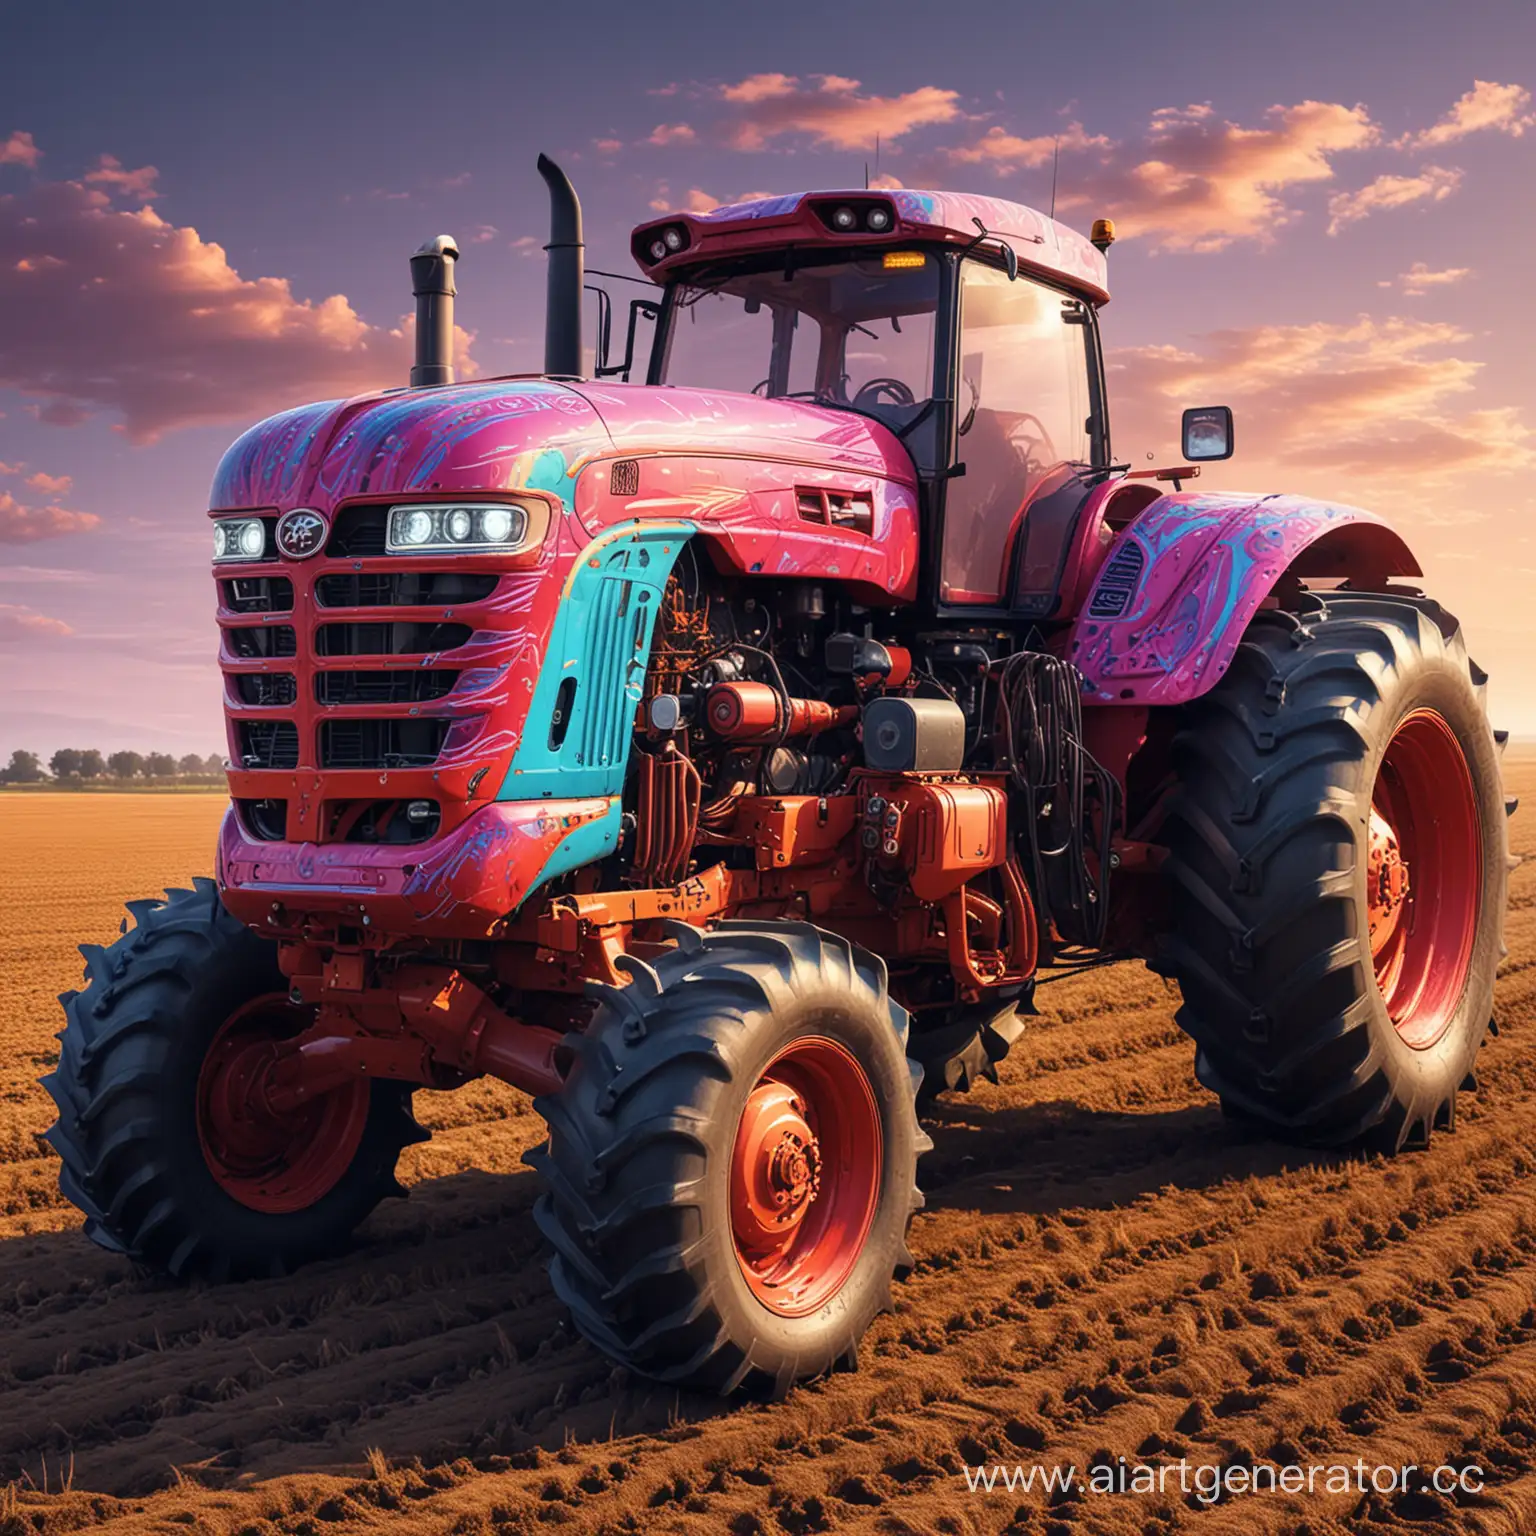 Futuristic-AIPowered-Psychedelic-Tractor